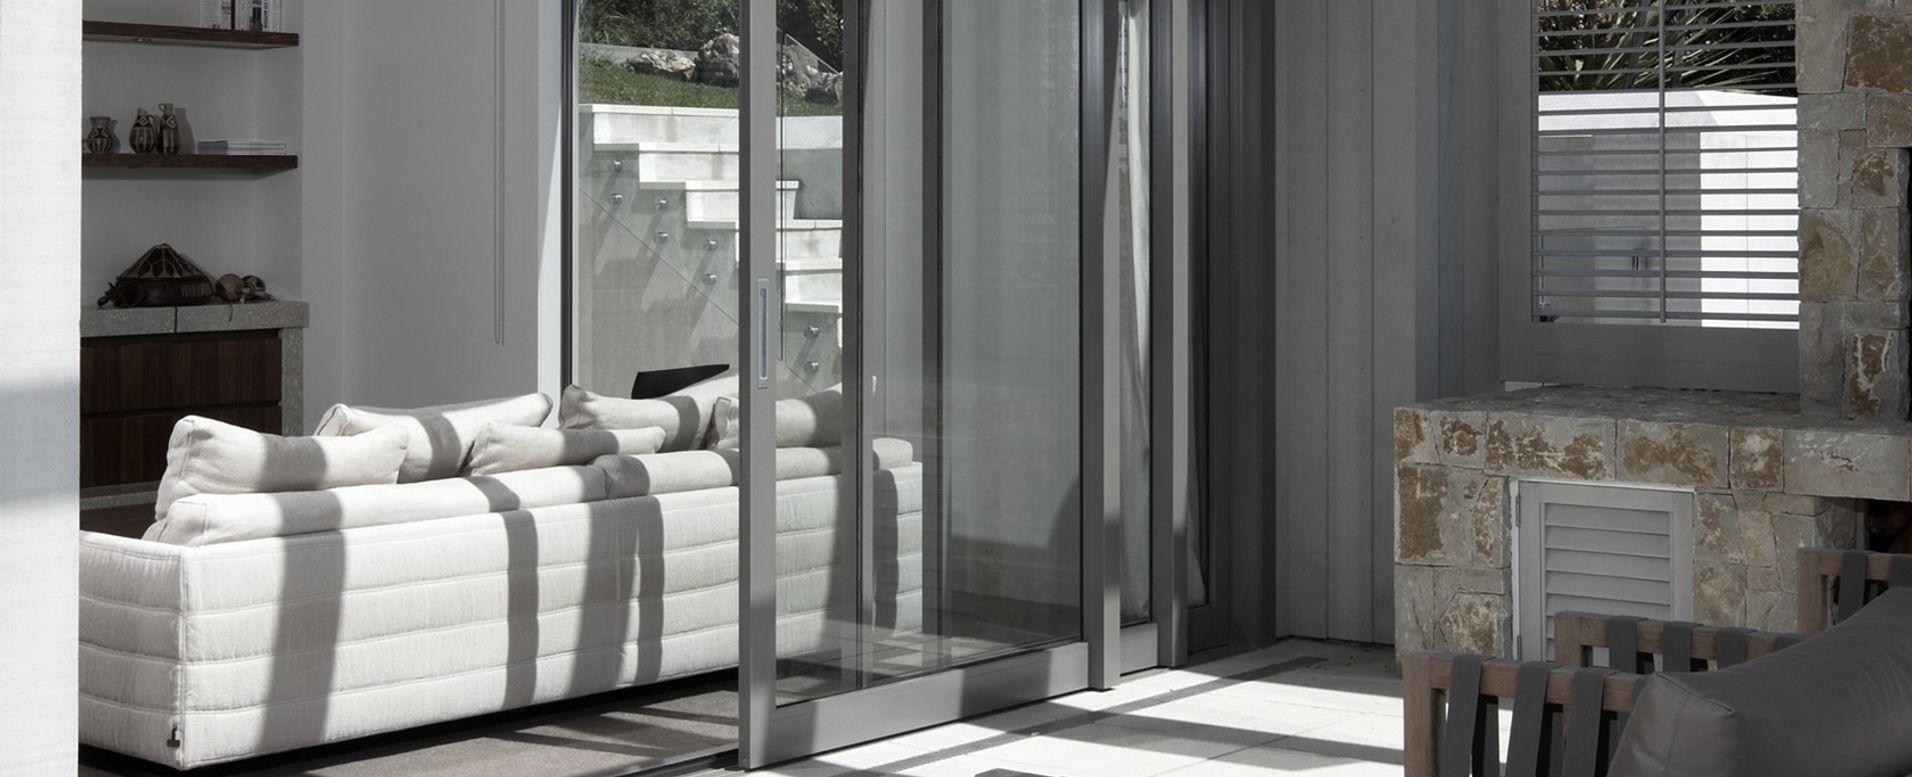 Fisher™ Windows and Doors Banner image